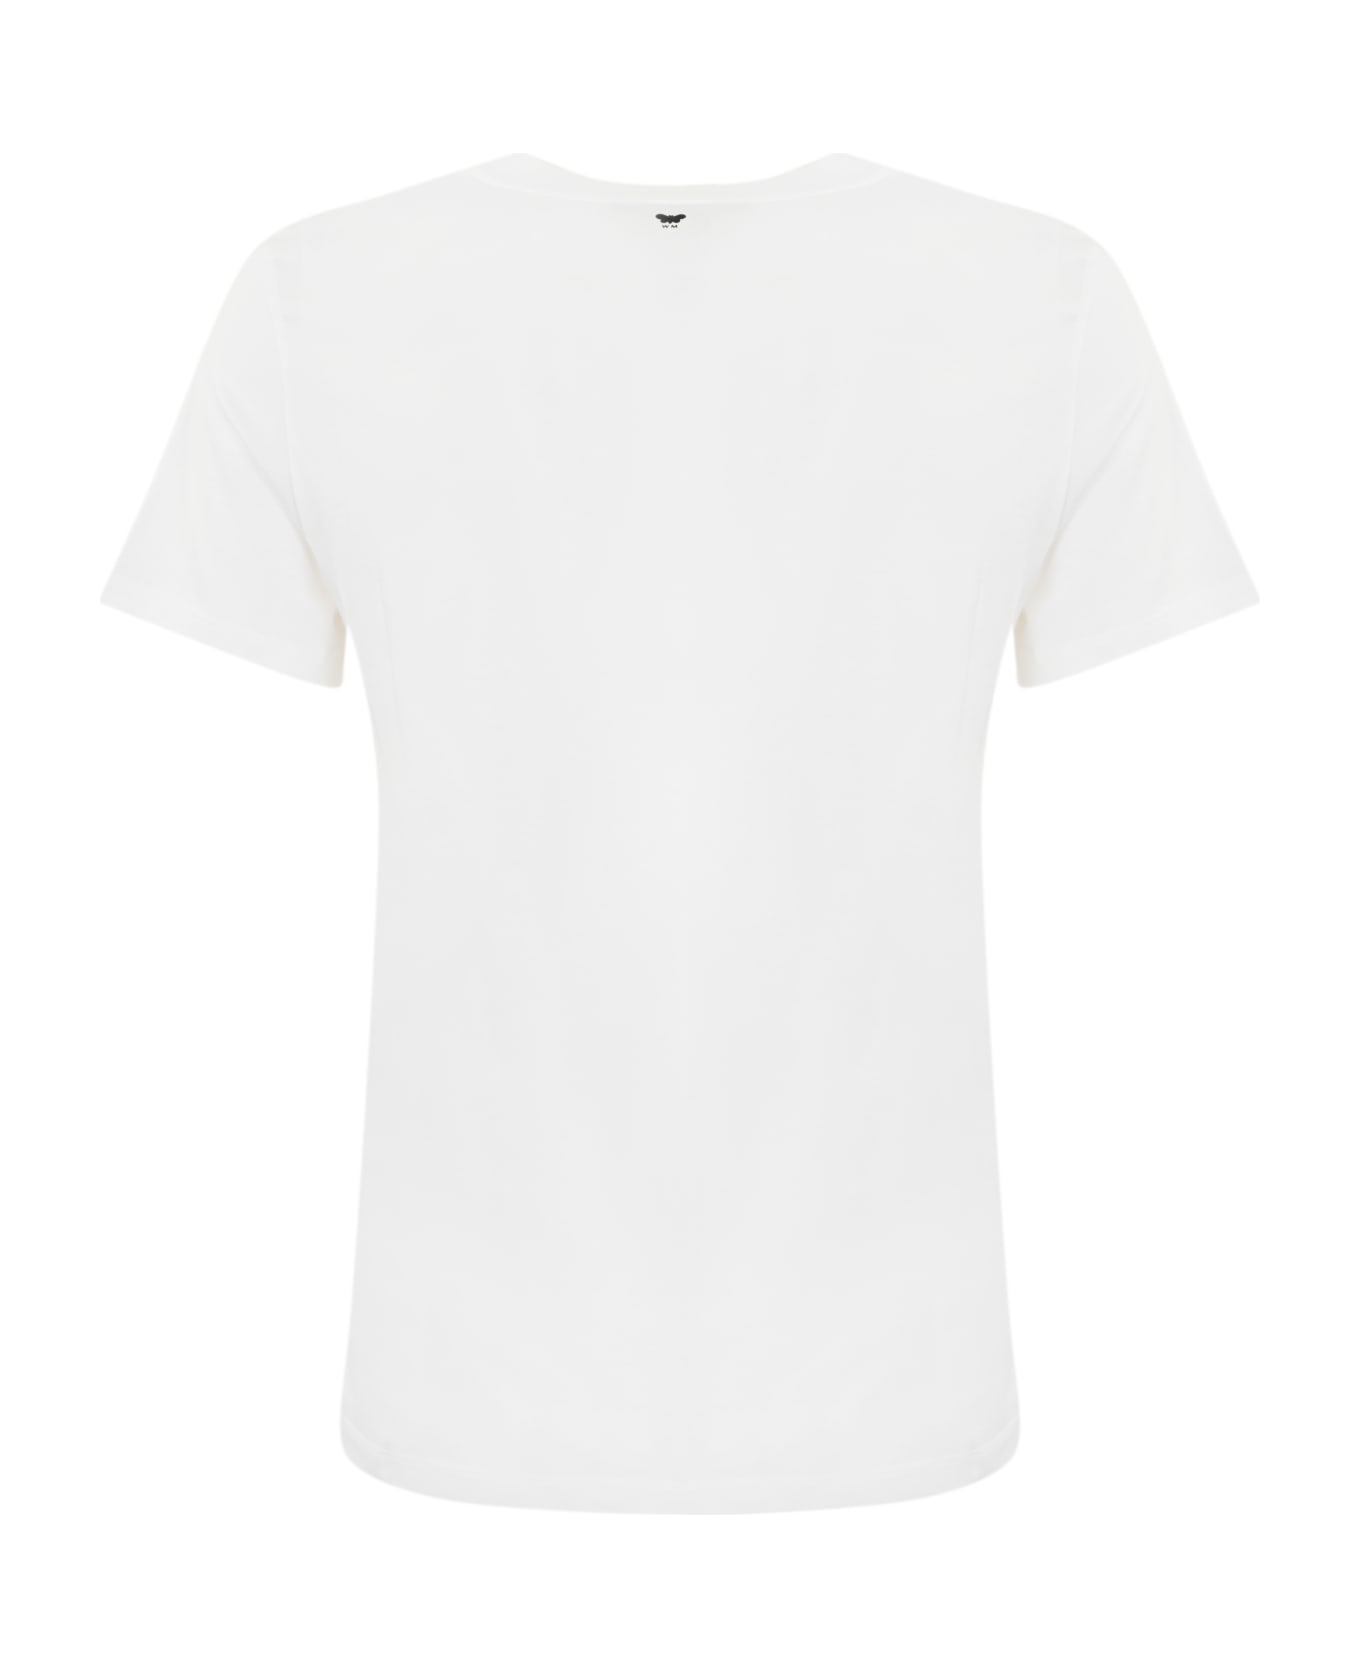 Weekend Max Mara White 'nervi' Cotton T-shirt With Nervers Print - OFF WHITE